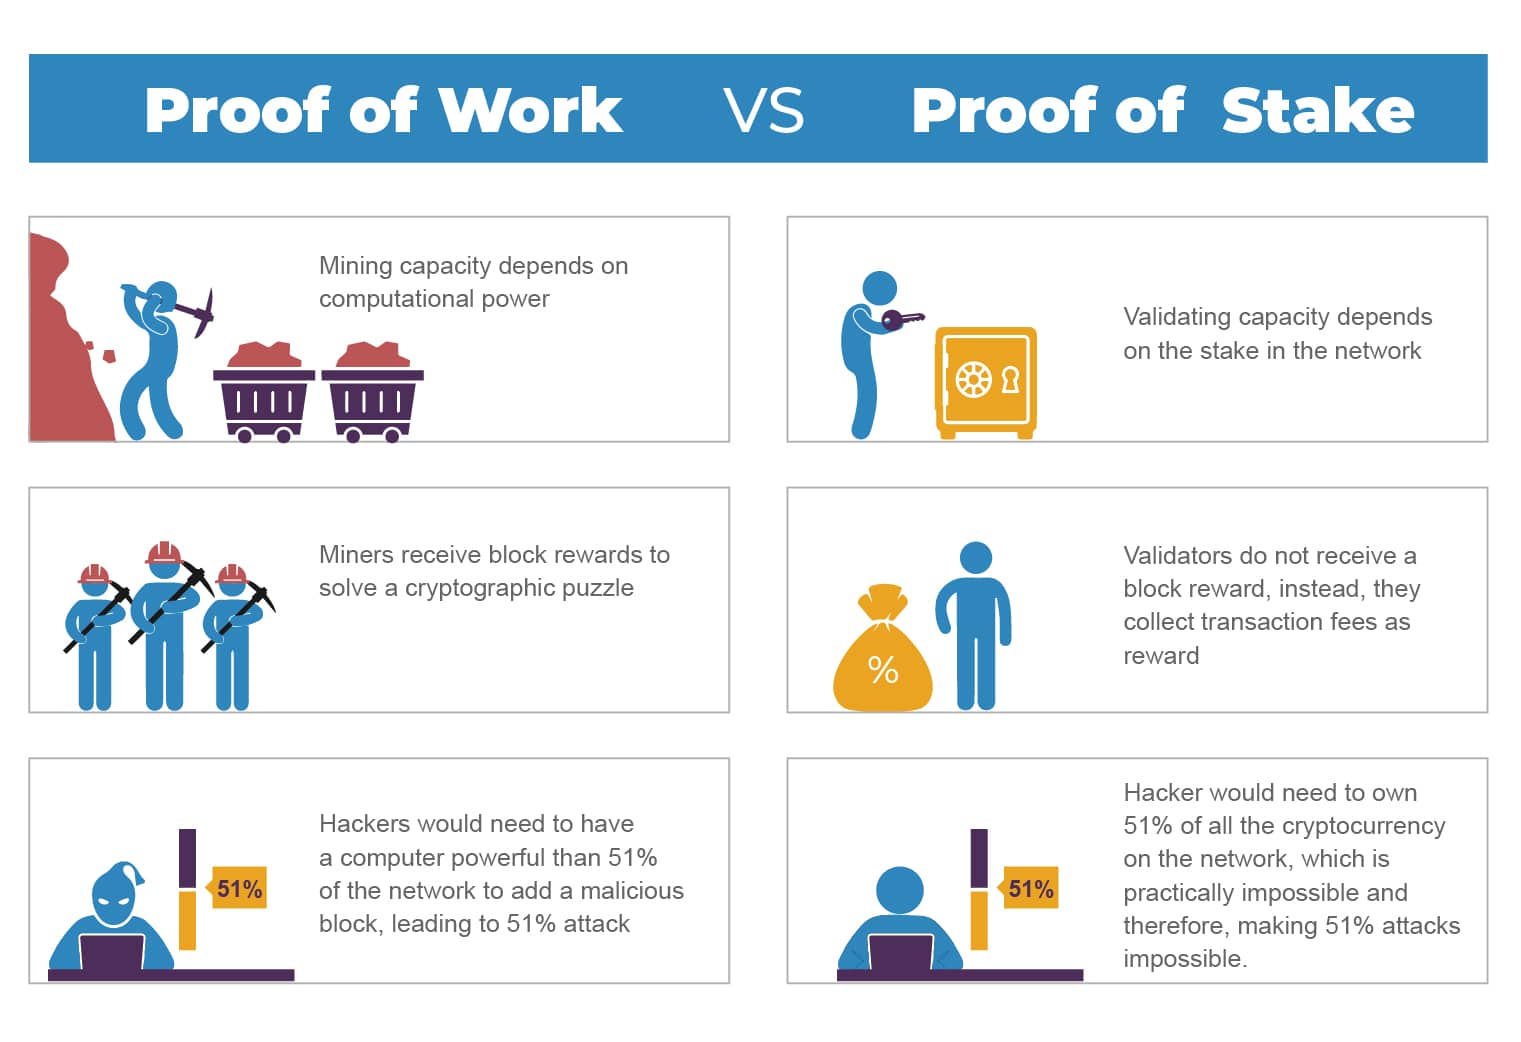 Proof-of-stake vs. proof-of-work